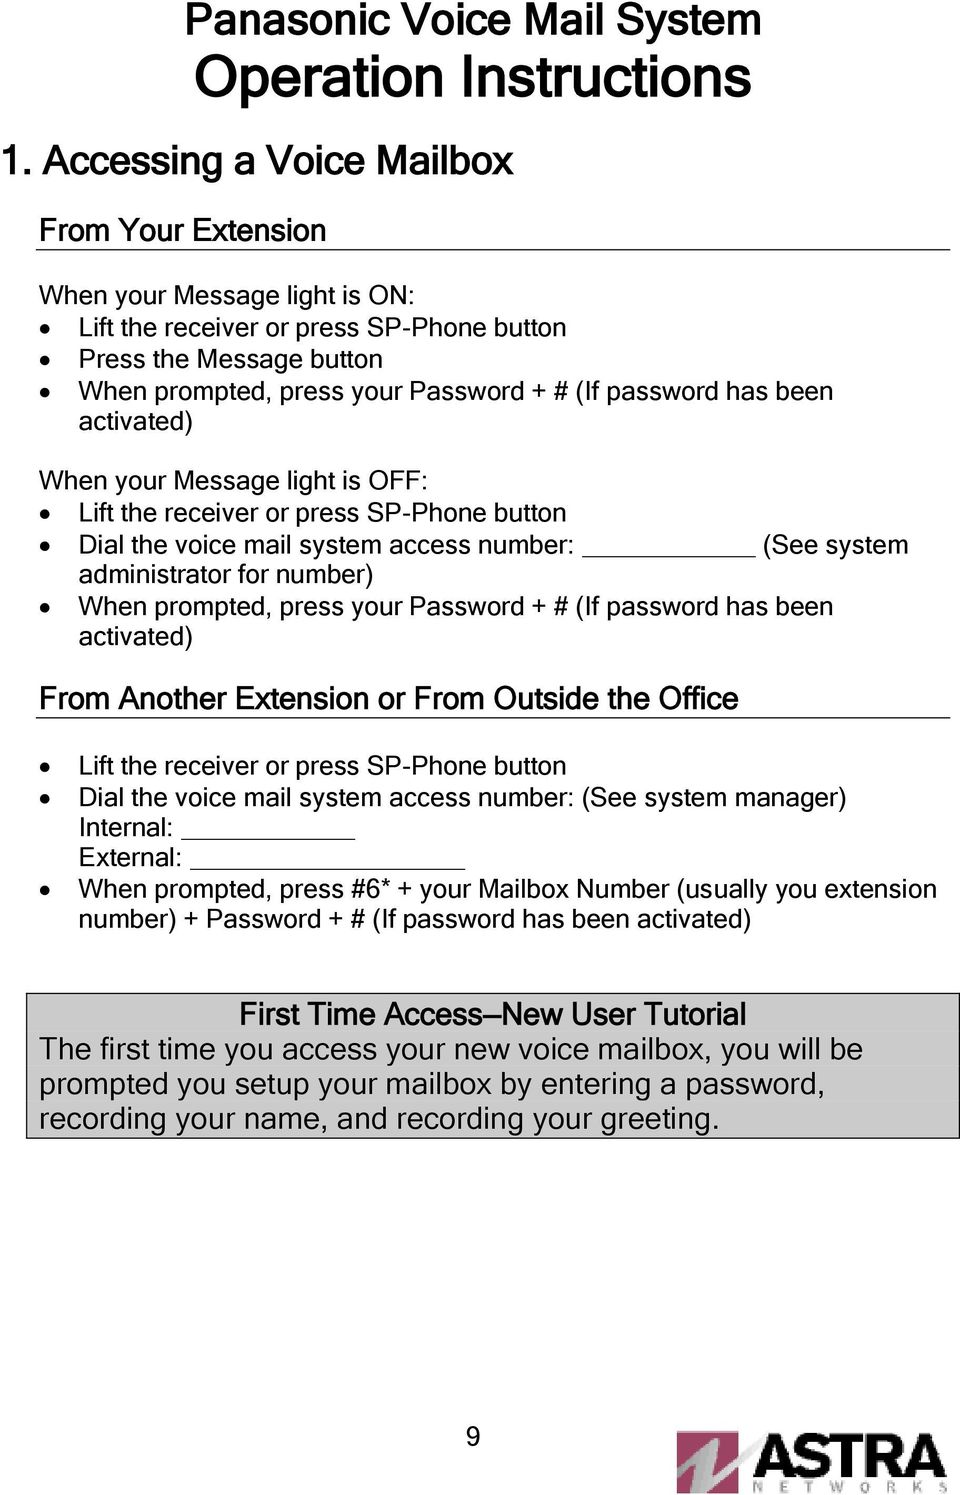 is OFF: Dial the voice mail system access number: (See system administrator for number) When prompted, press your Password + # (If password has been activated) From Another Extension or From Outside